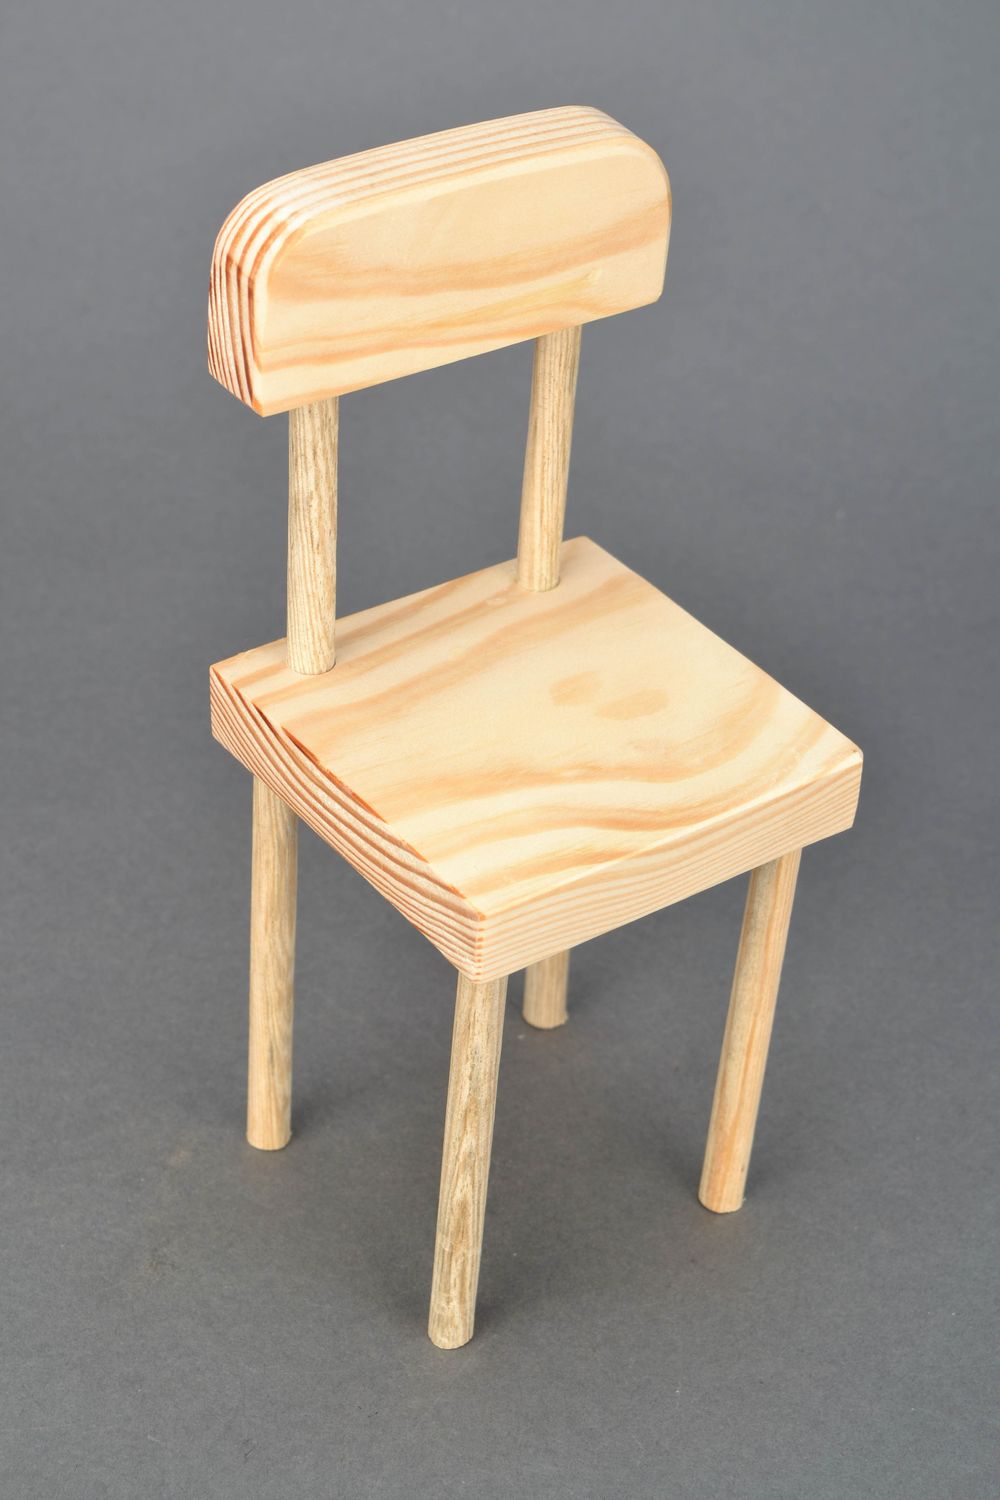 Decorative doll chair made of wood photo 1